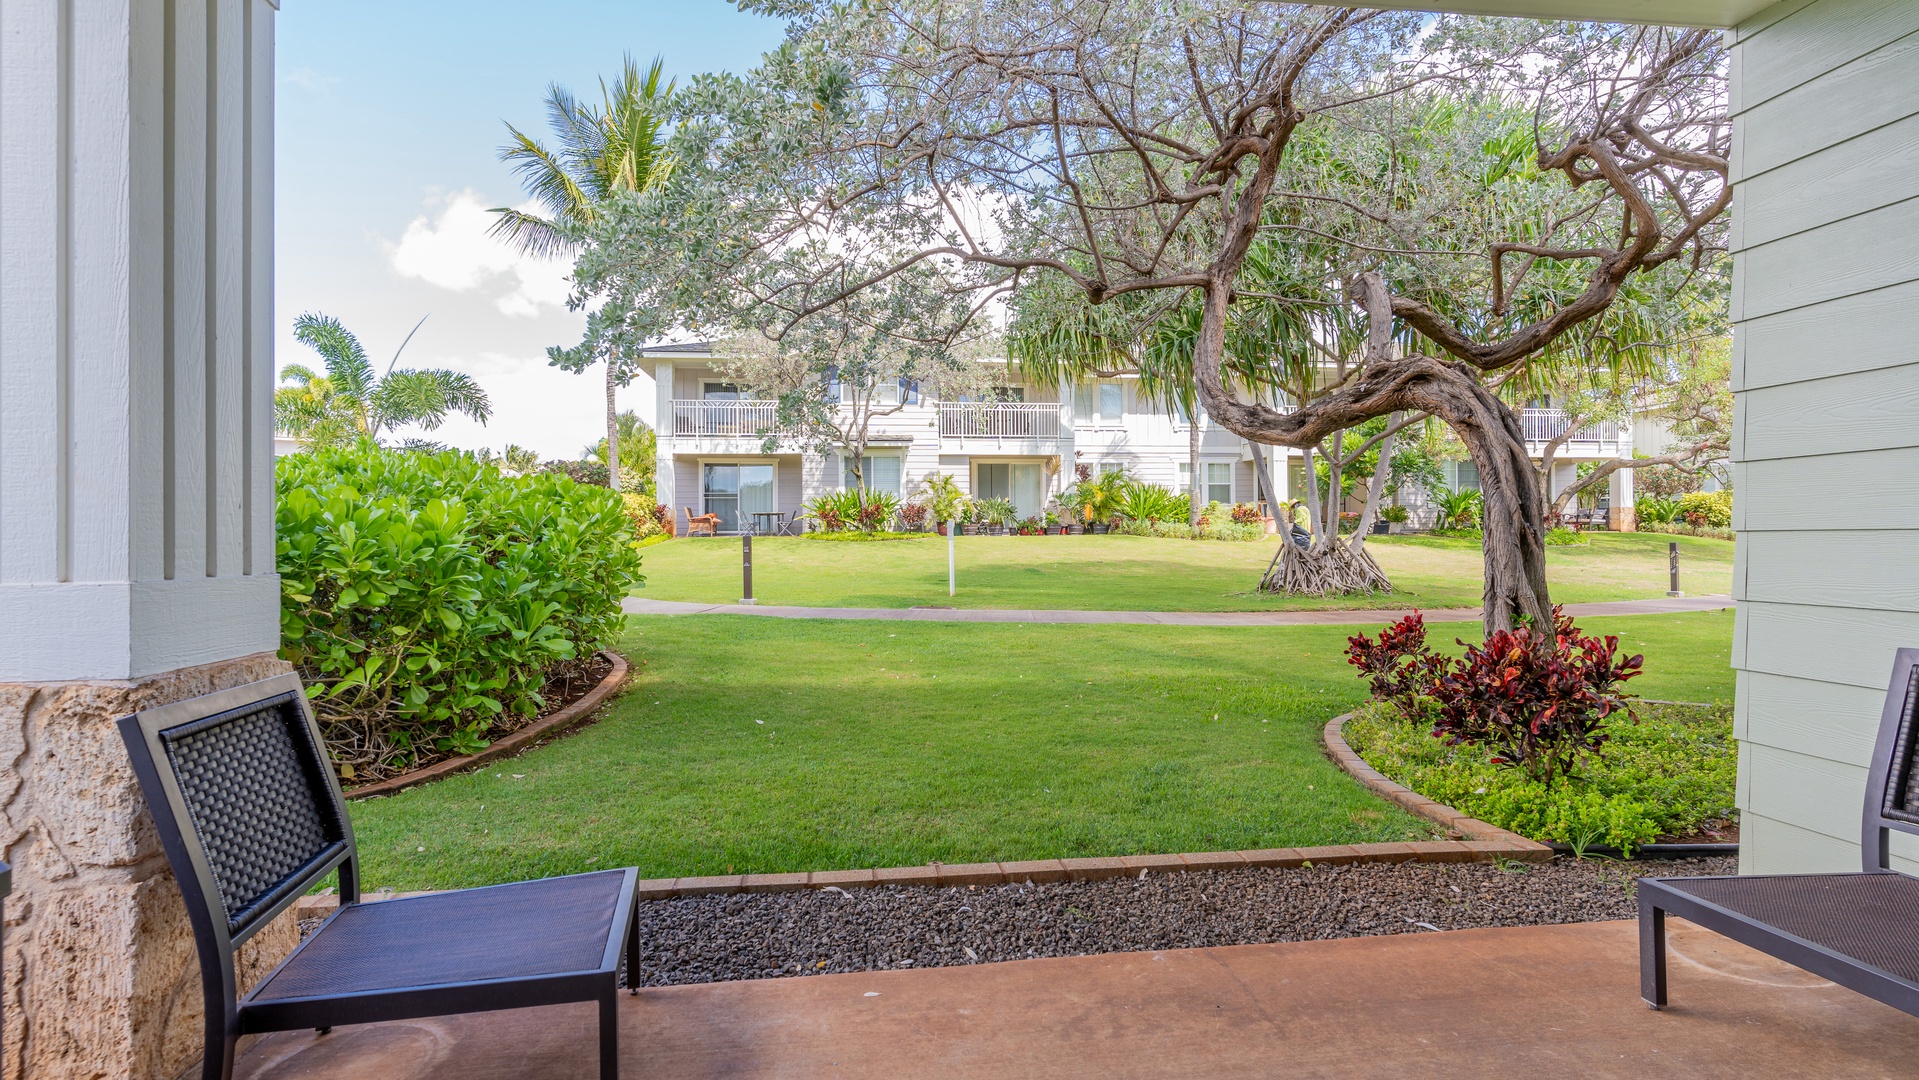 Kapolei Vacation Rentals, Ko Olina Kai 1027A - Sit outside and breathe in the island air.